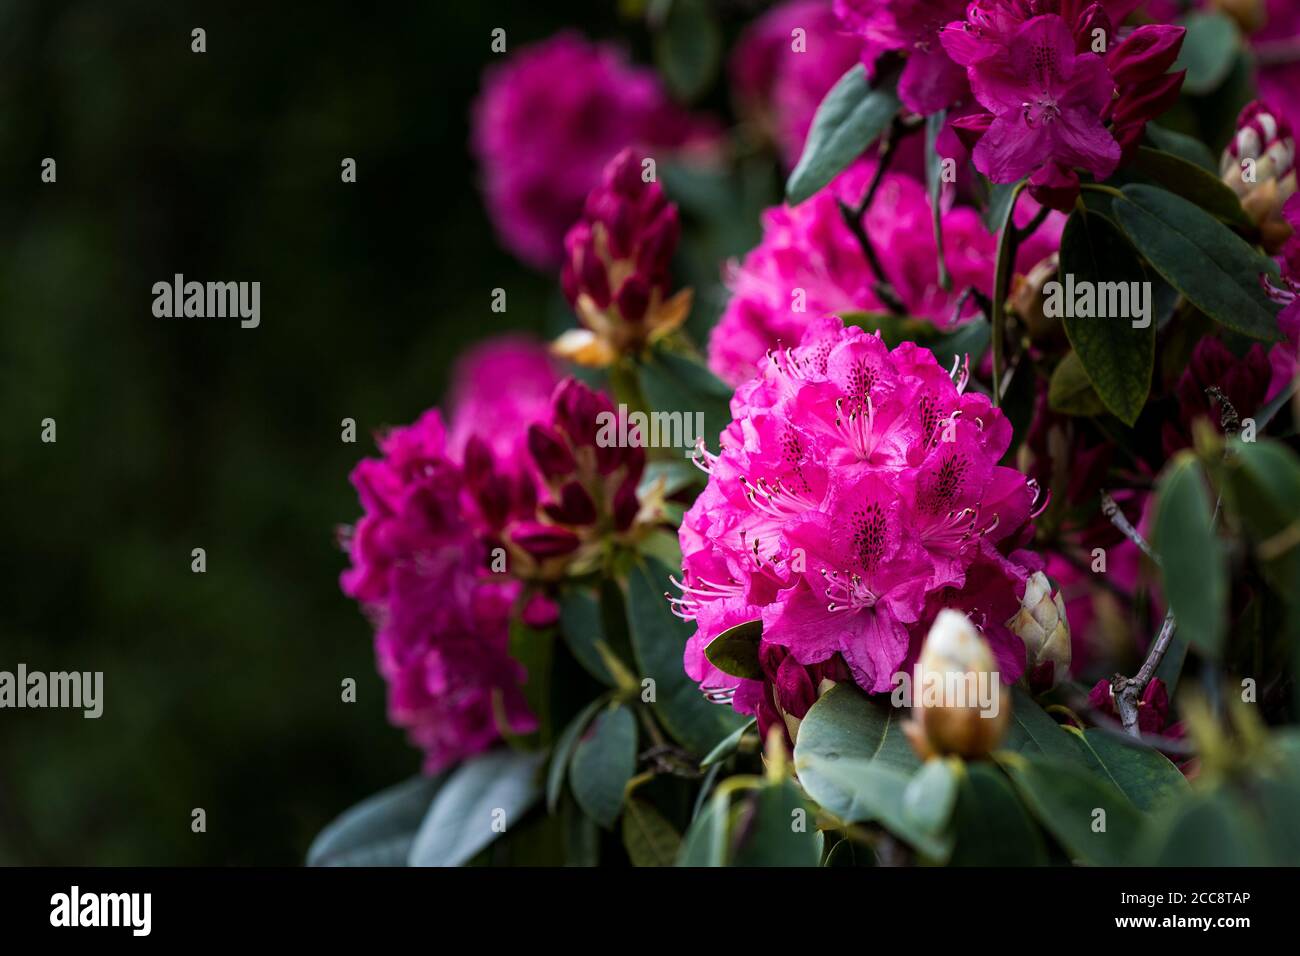 The spectacularly intense colour of the flowers of the Rhododendron bush Ericaceae. Stock Photo